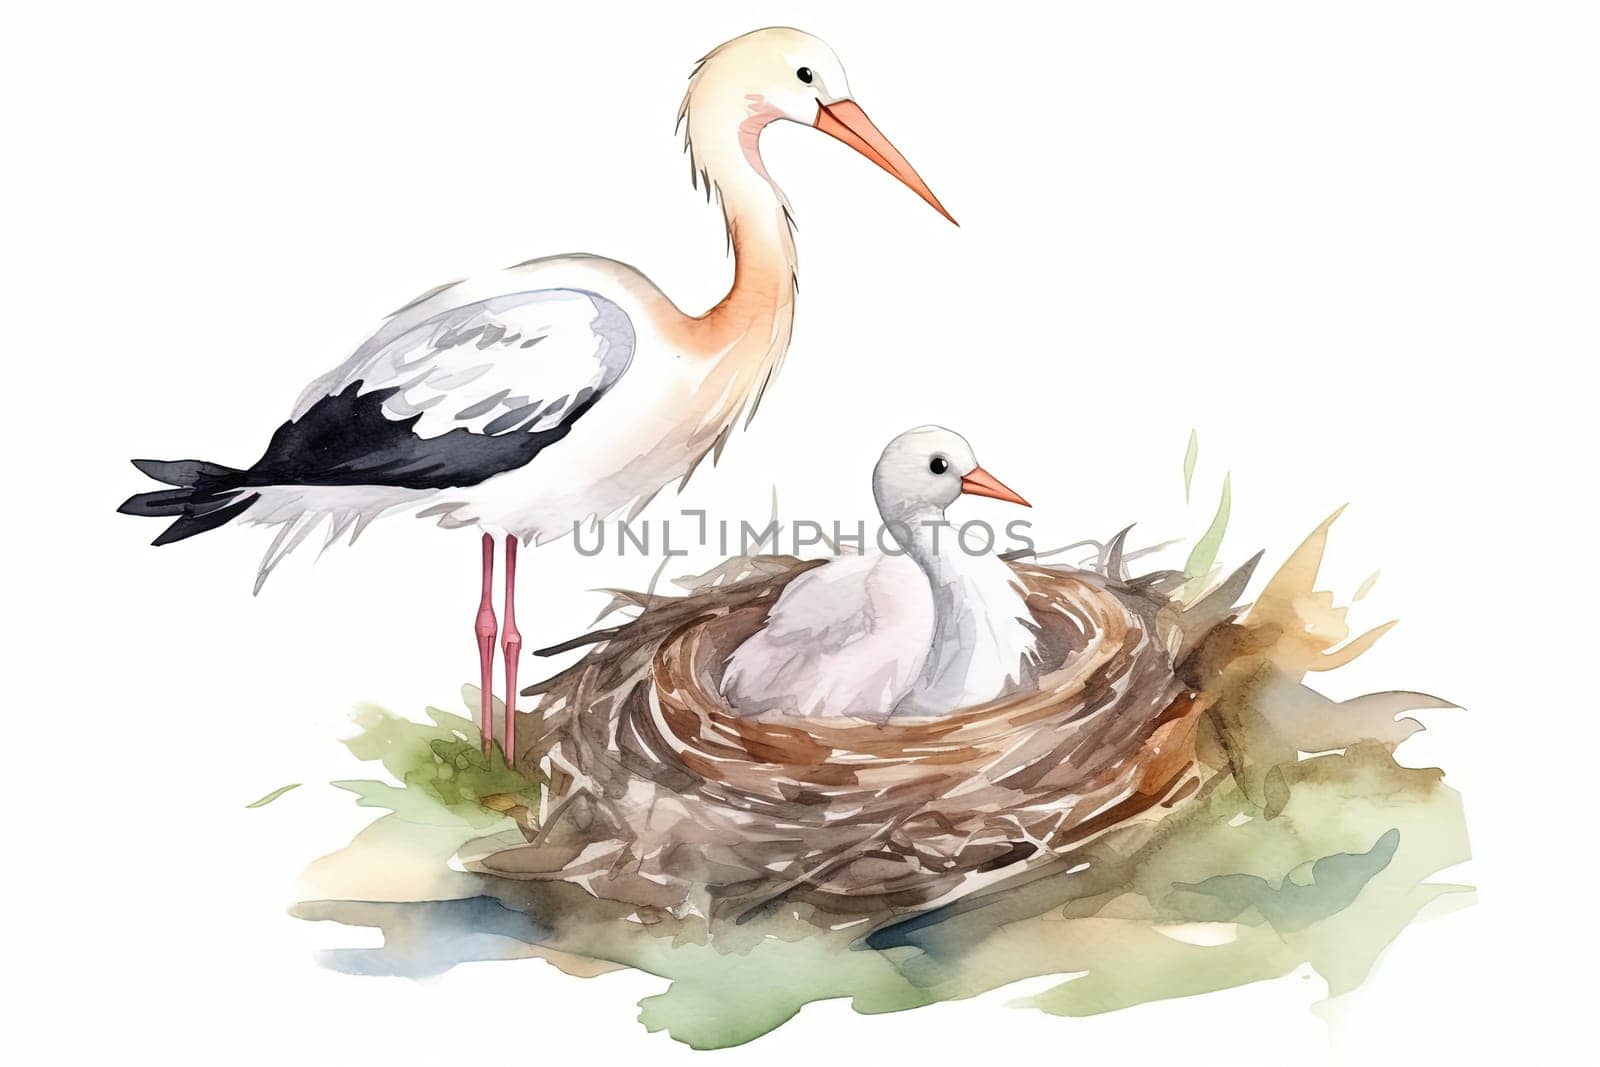 Watercolor Illustration Of Stork With A Little Stork In The Nest by GekaSkr